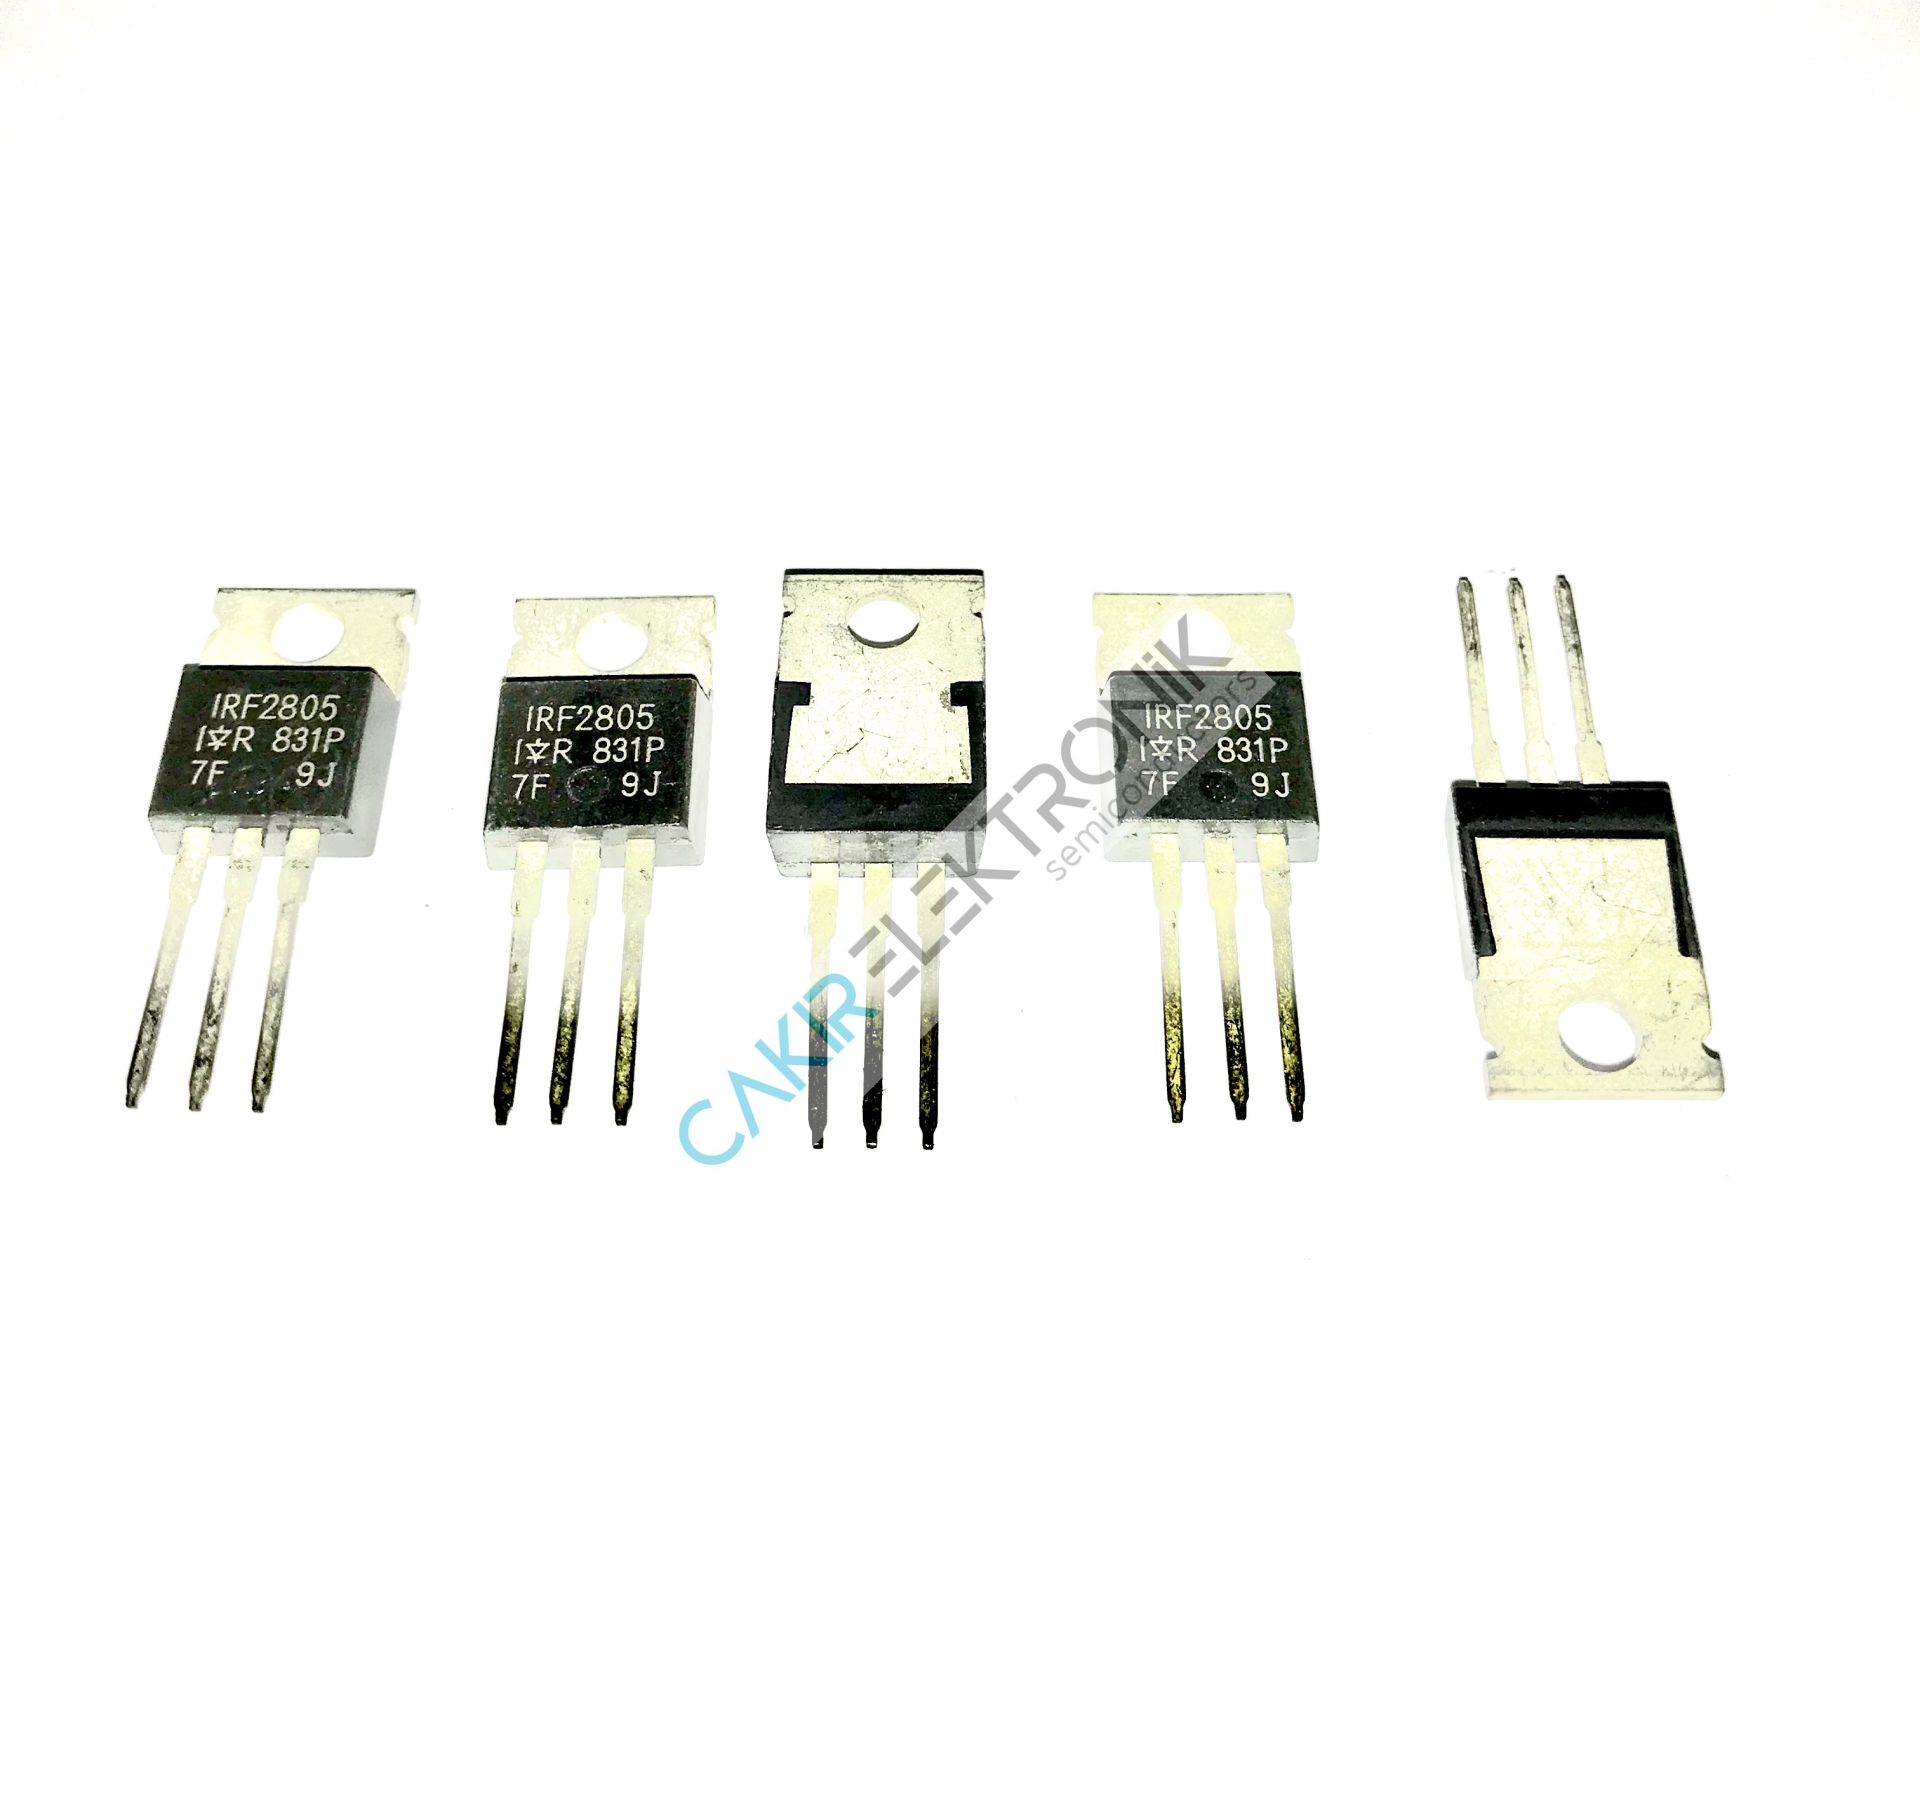 IRF2805 - İRF2805 - 55V. 75A. Power MOSFET